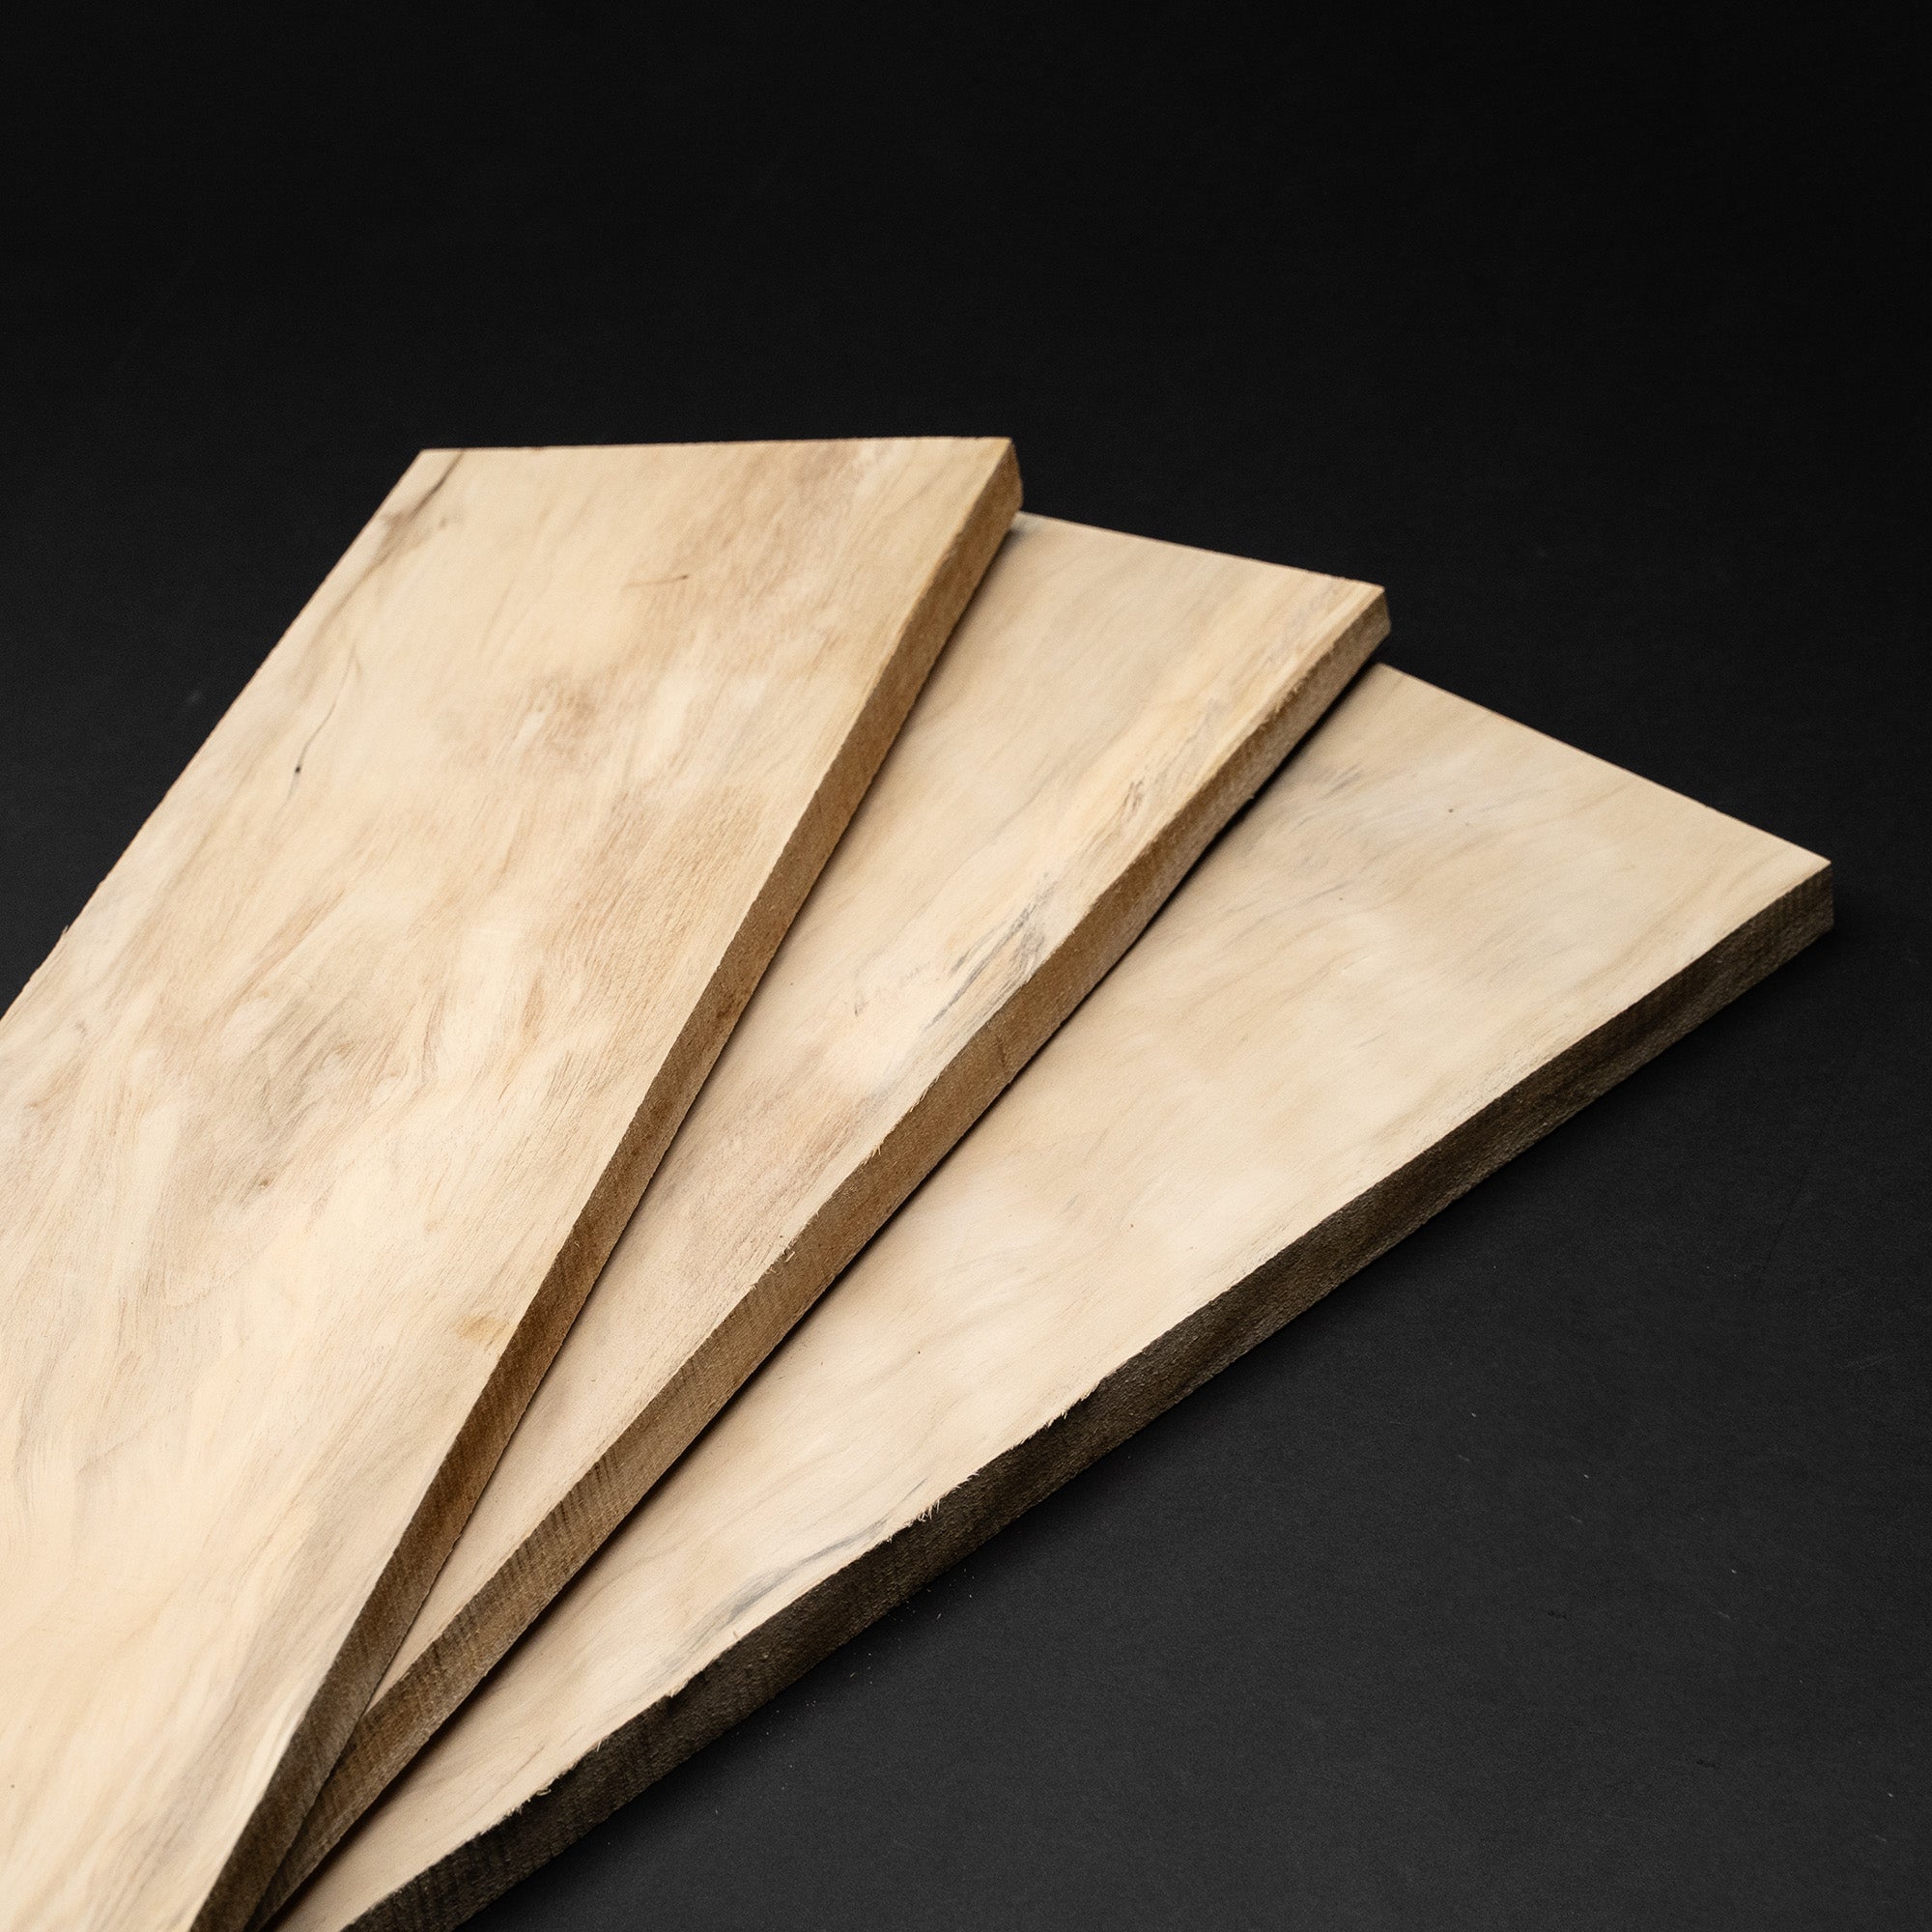 4/4 1” Basswood Boards - Kiln Dried Dimensional Lumber - Cut to